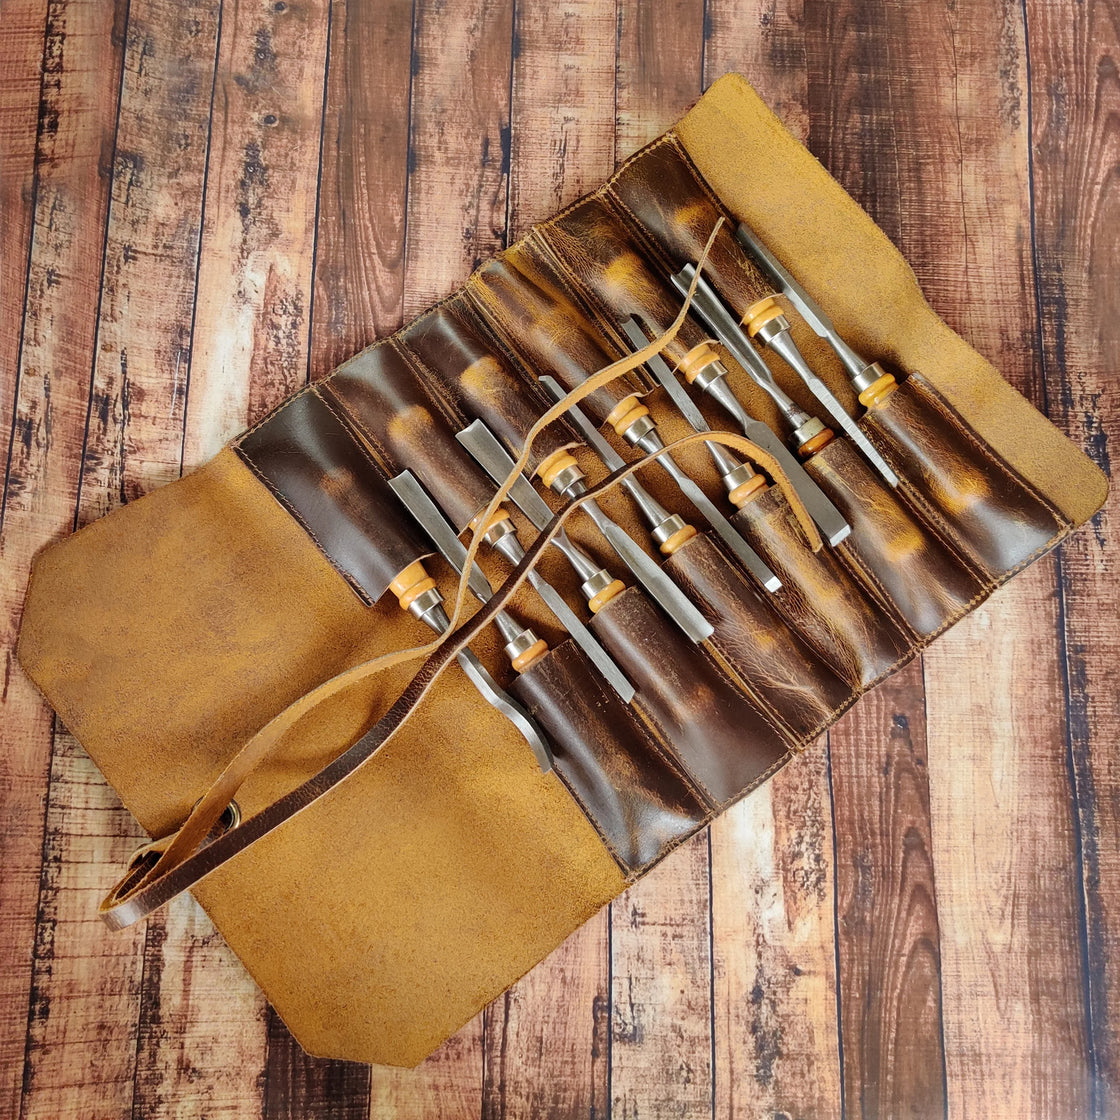 Full Grain Leather Tool Roll Up Pouch- Handcrafted Tool Kit (10